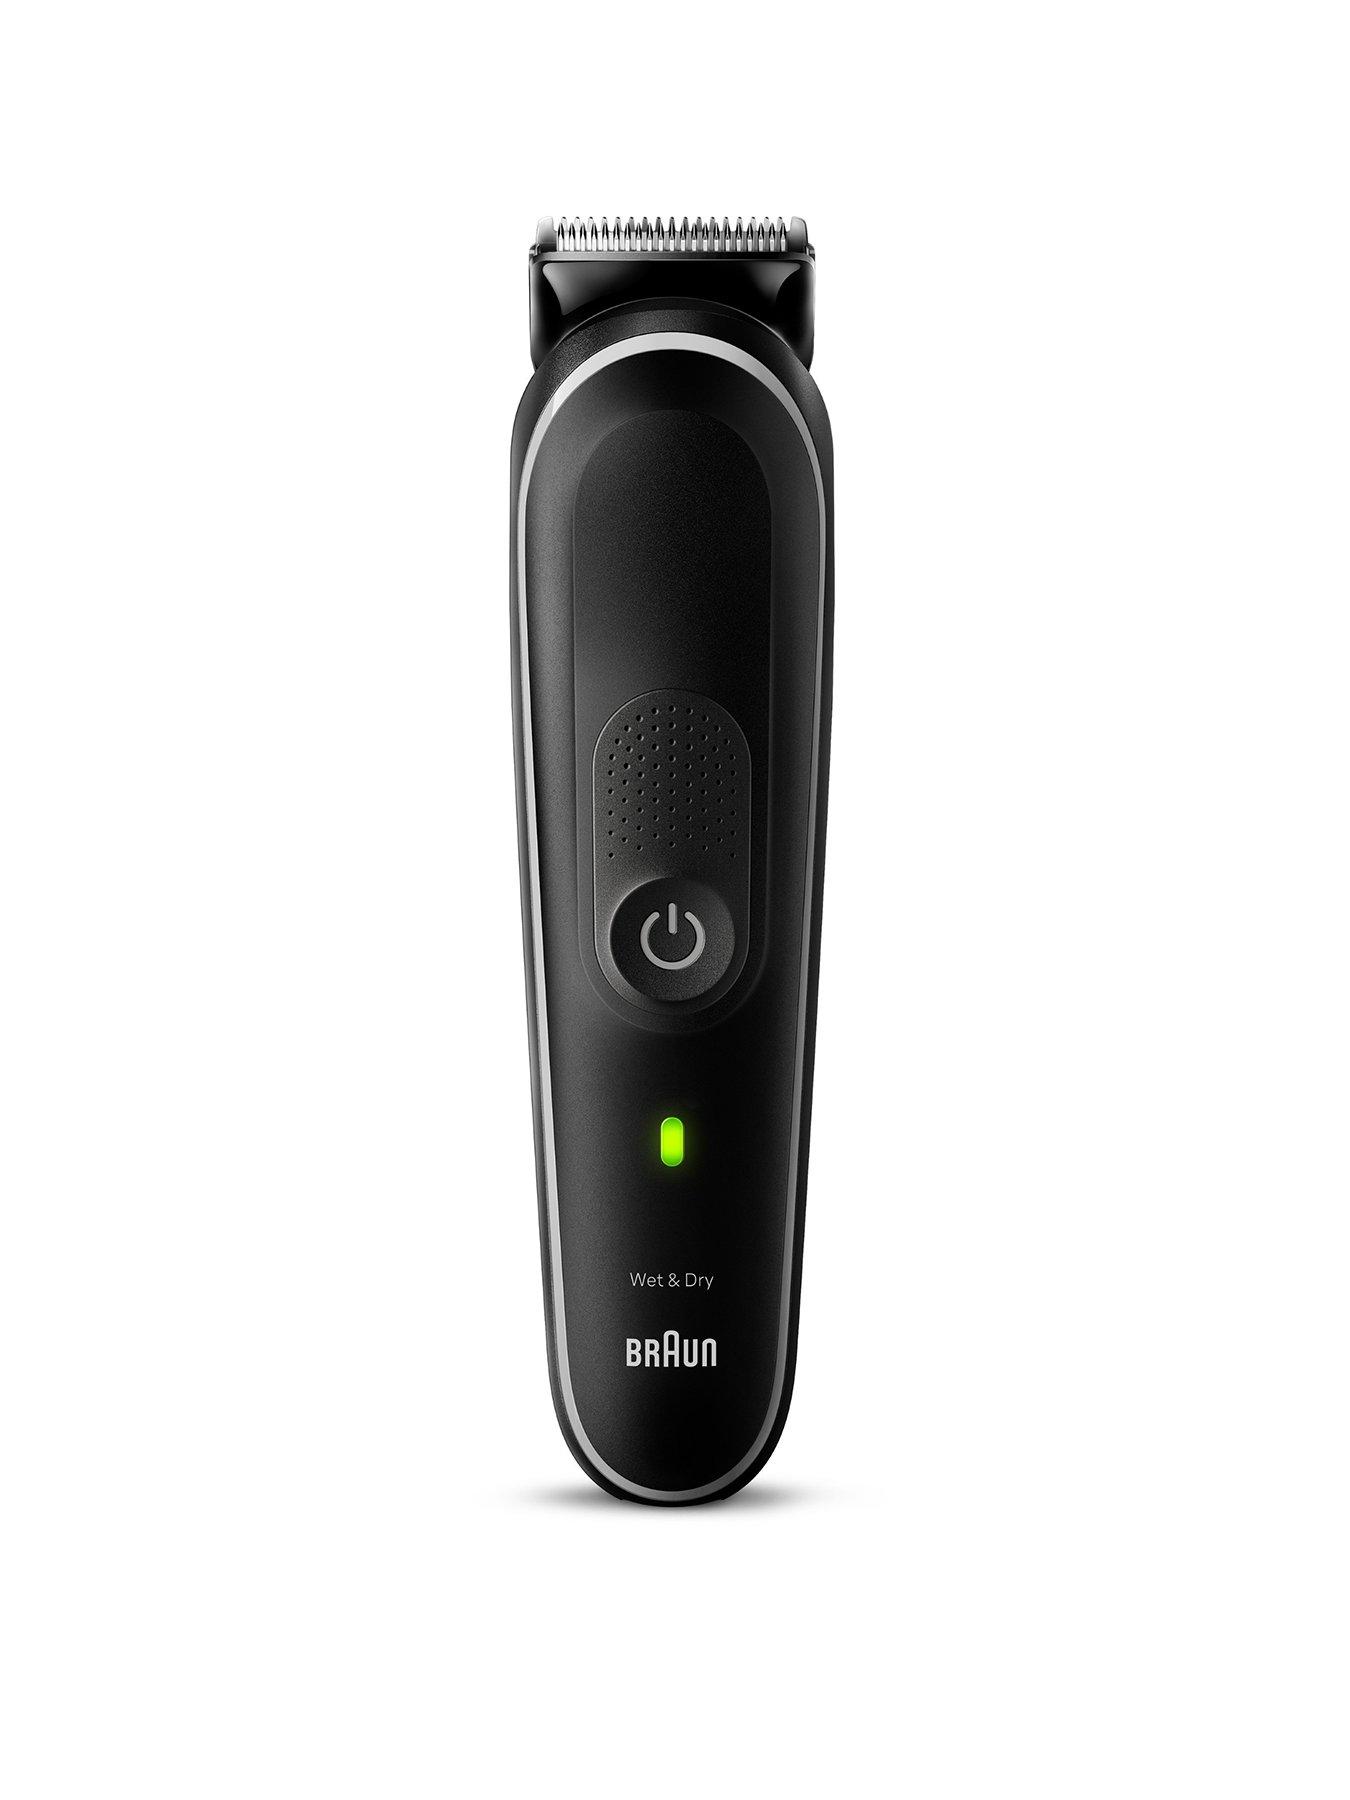 Braun Series XT5 All-in-One Men's Beard Trimmer and Electric Razor